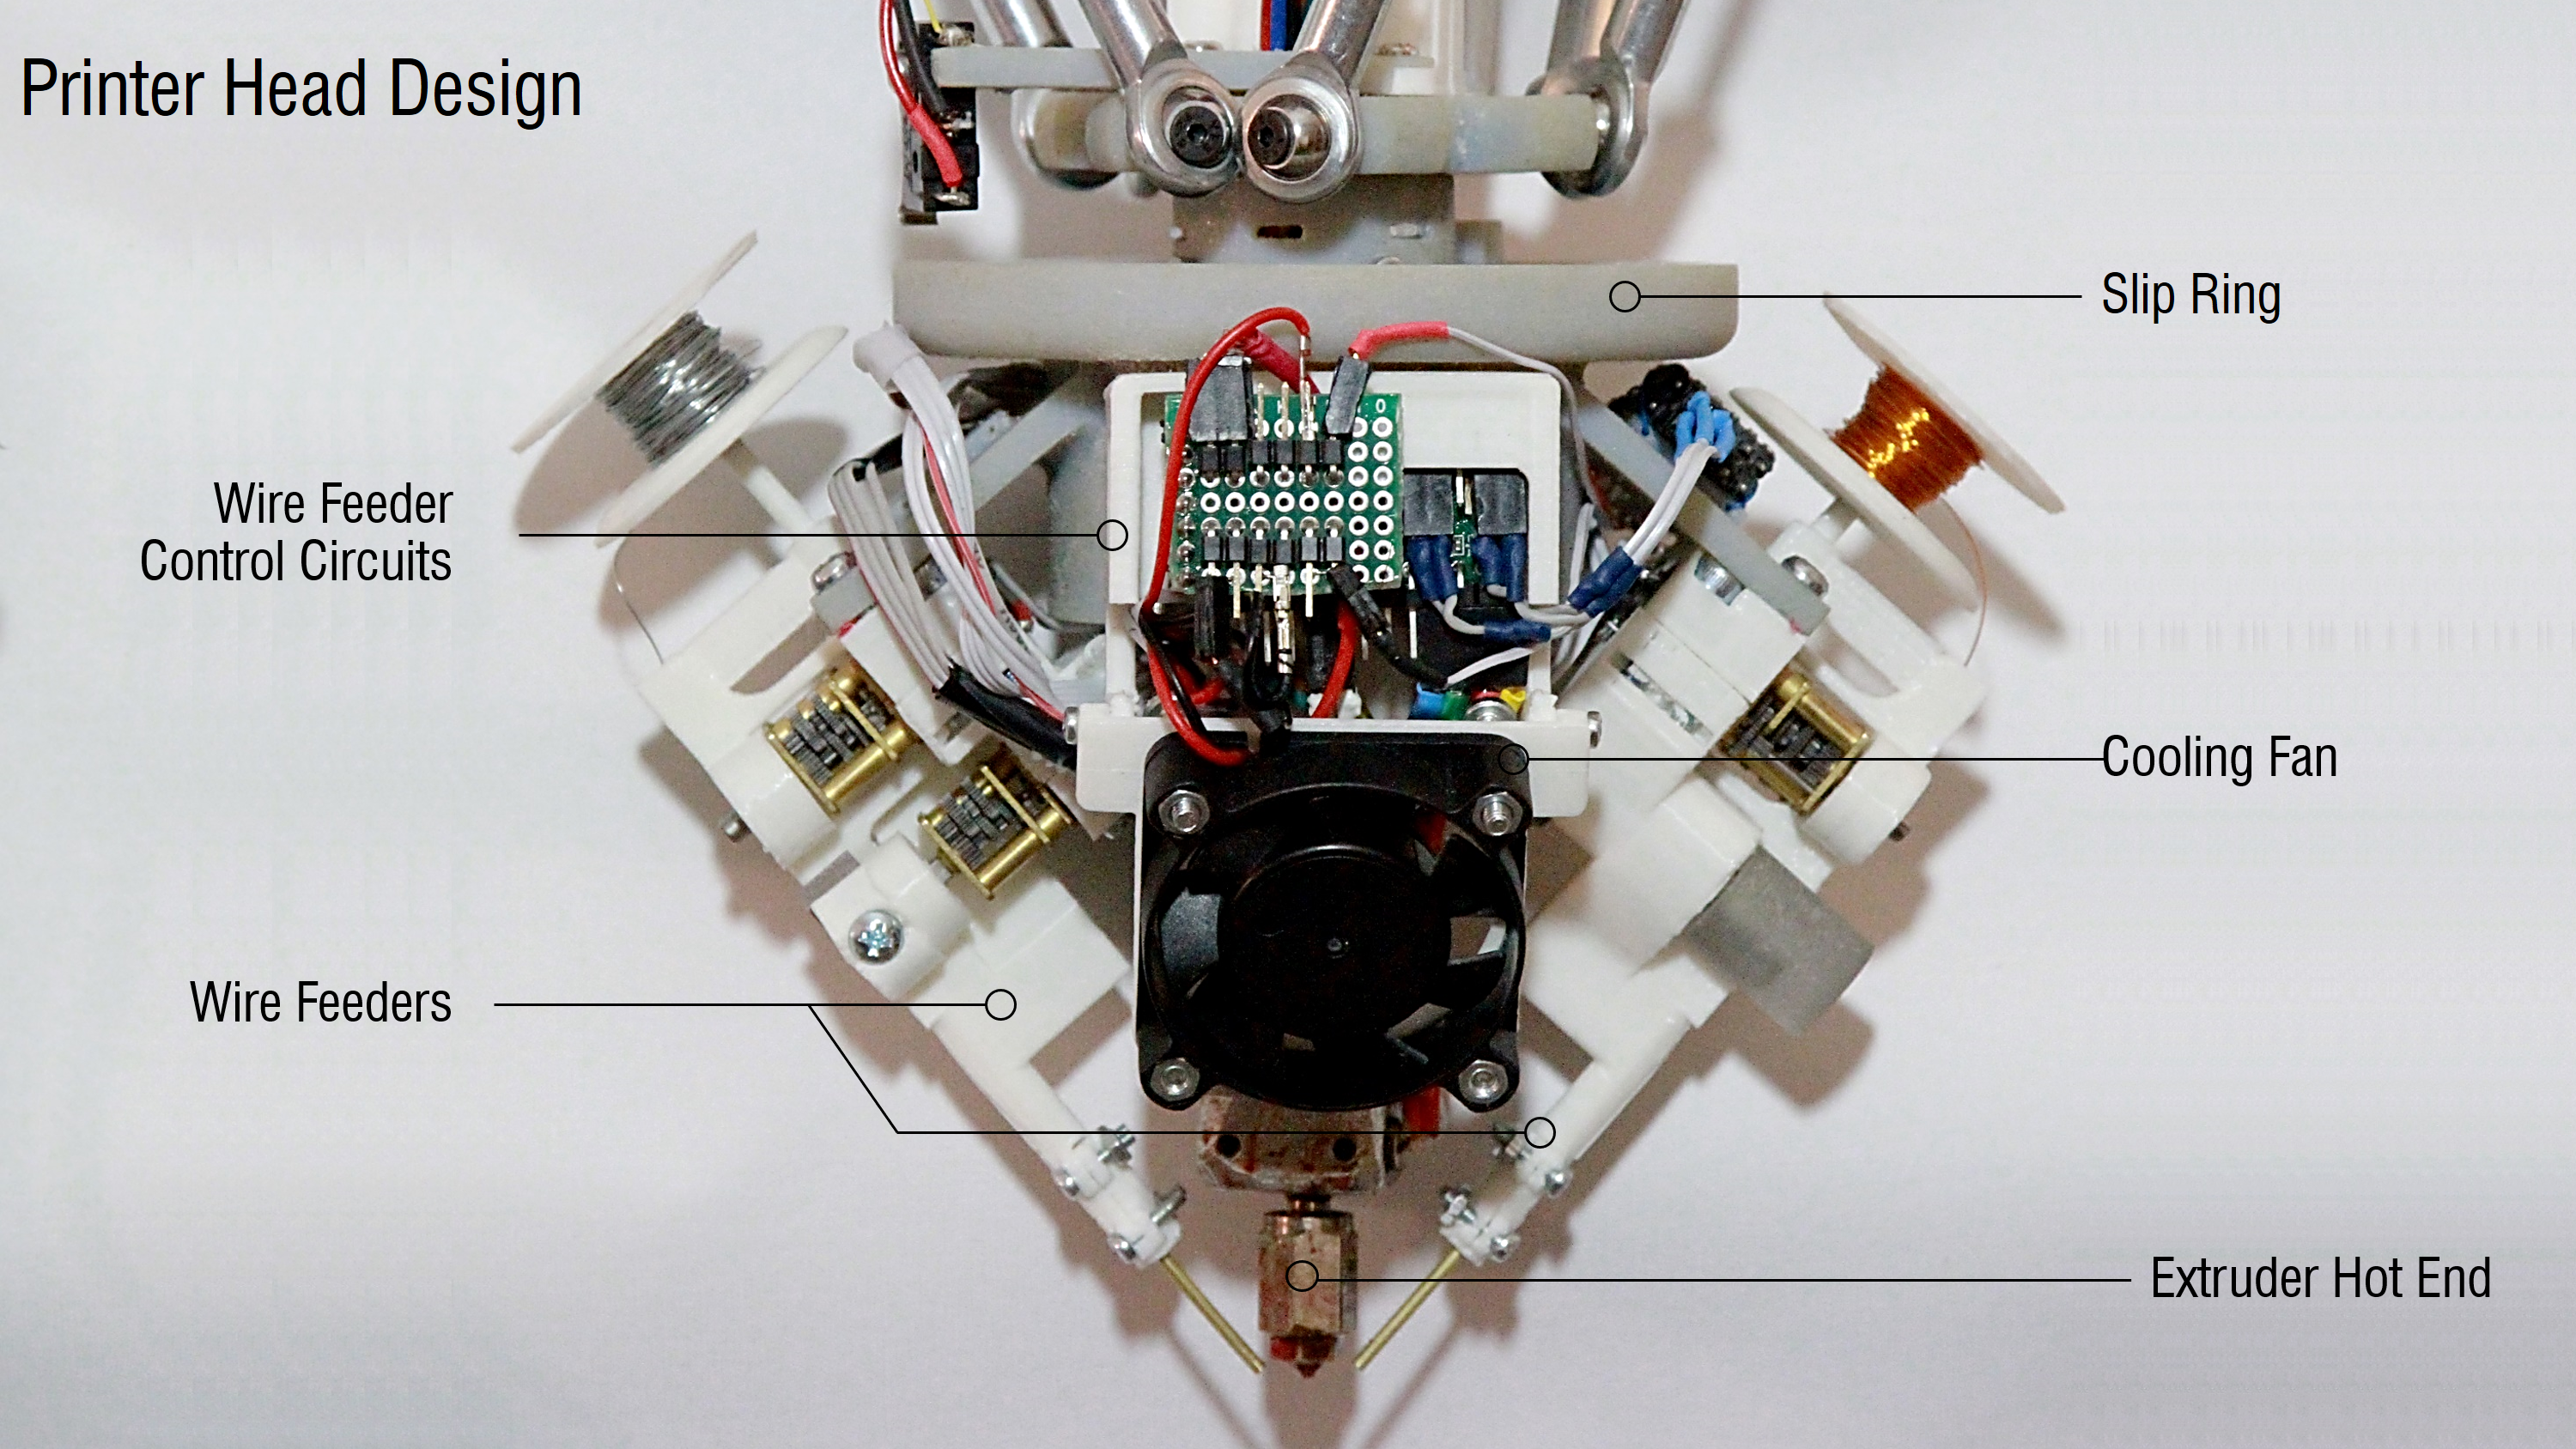 Image: A 3D Printer for Electromagnetic Devices